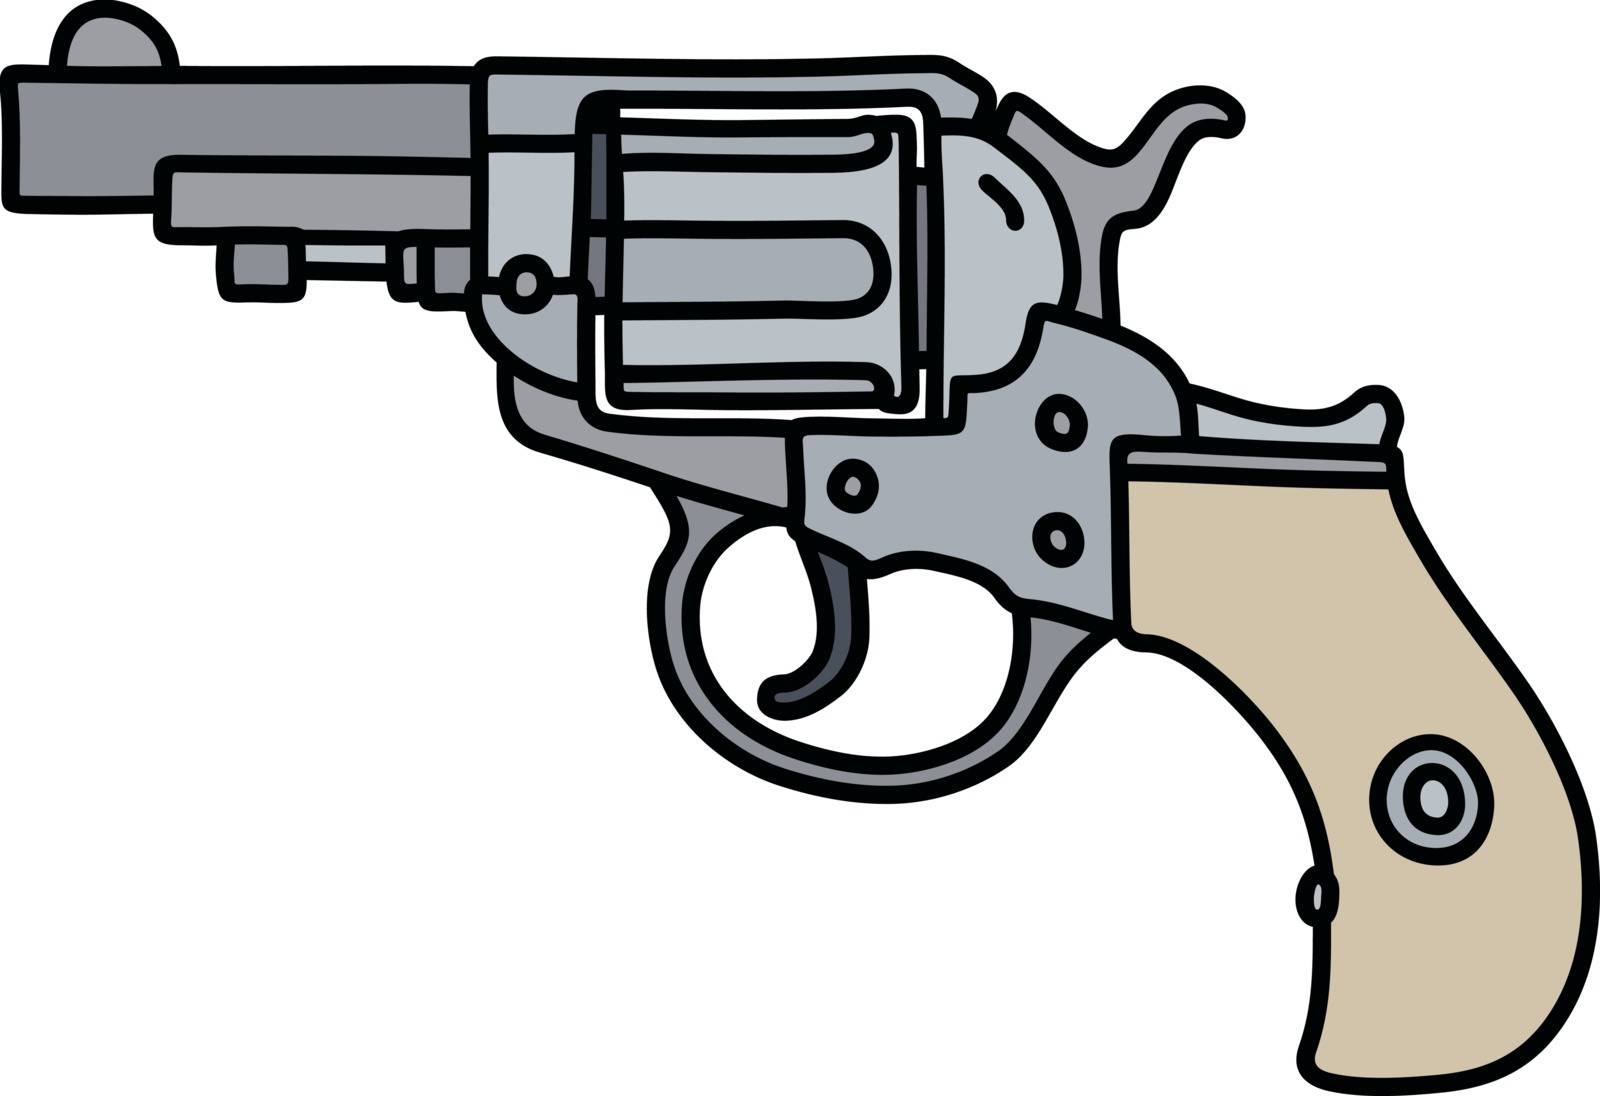 The hand drawing of a classic steel short revolver